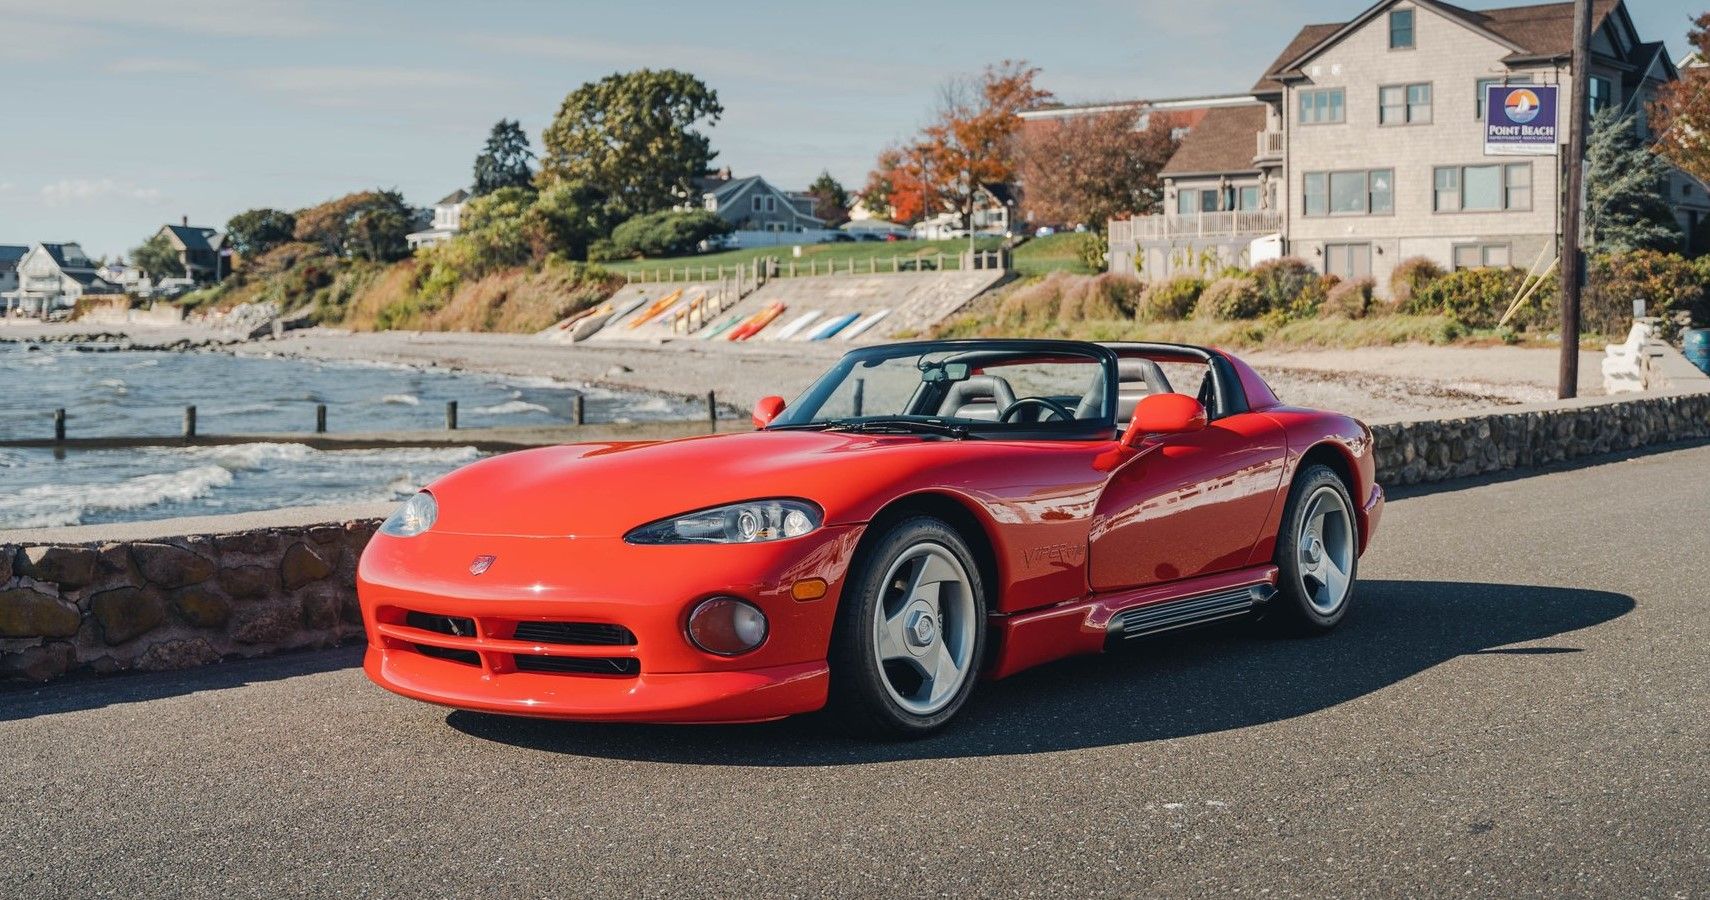 A Used First-Gen Dodge Viper Is A Surprisingly Affordable Classic Car That Will Appreciate In Value